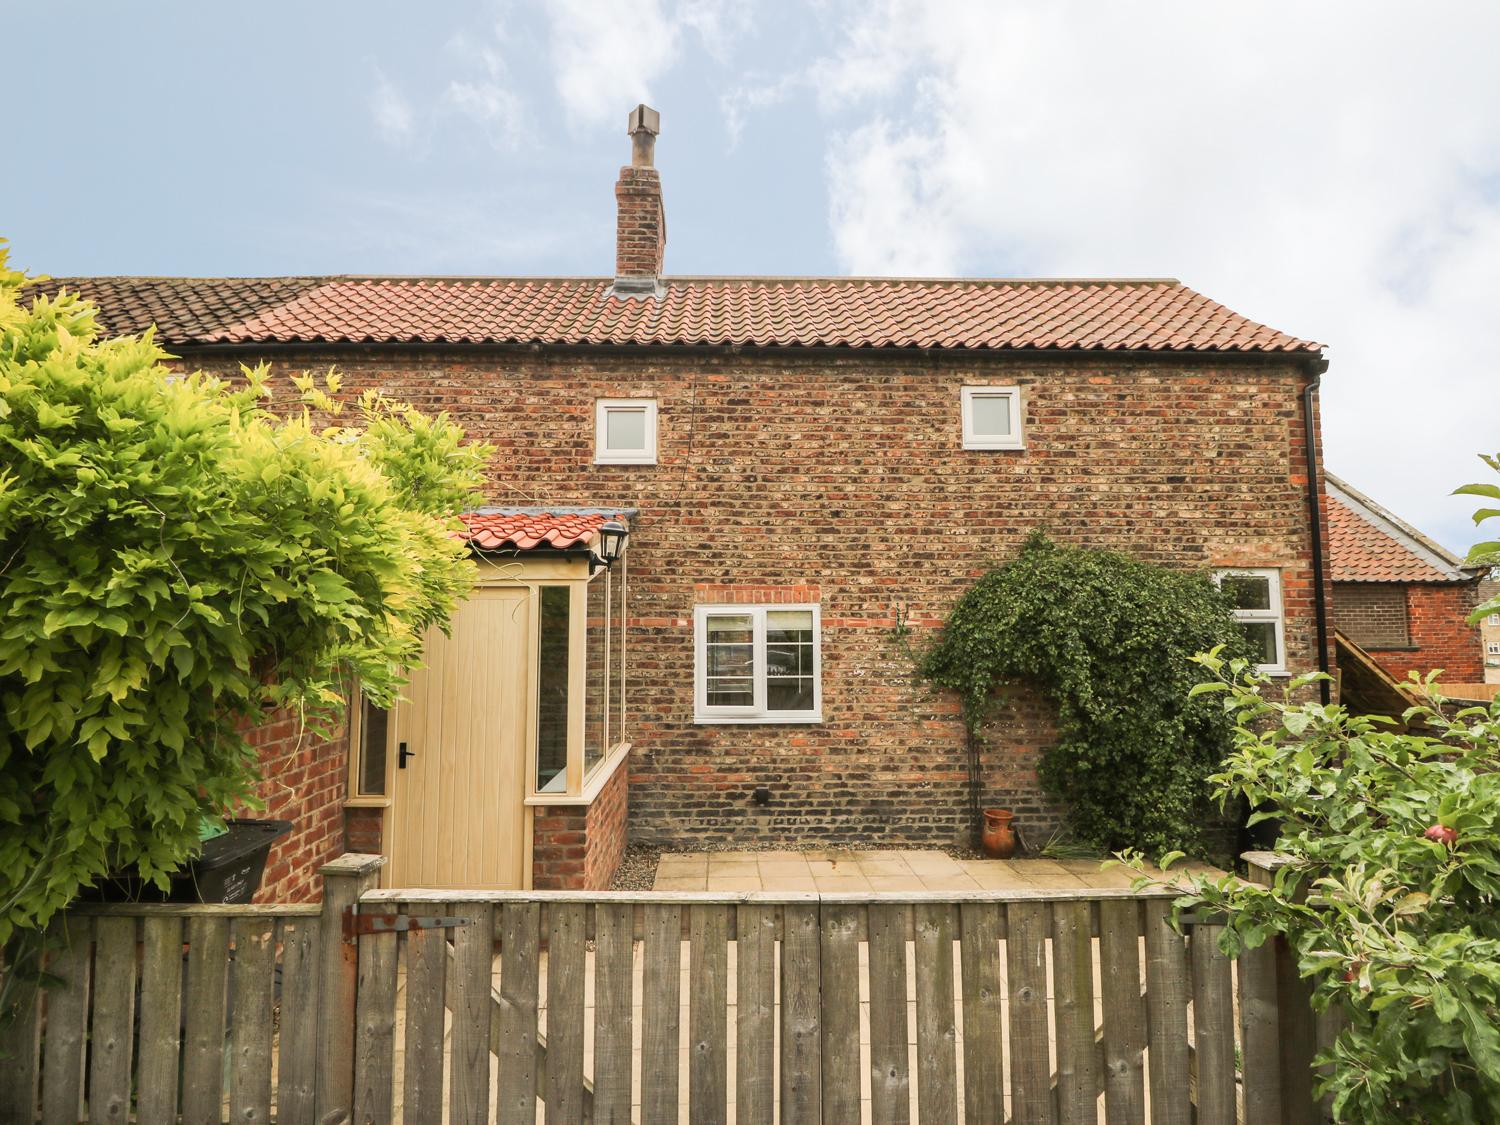 Holiday Cottage Reviews for 1 School Lane - Self Catering Property in Malton, North Yorkshire